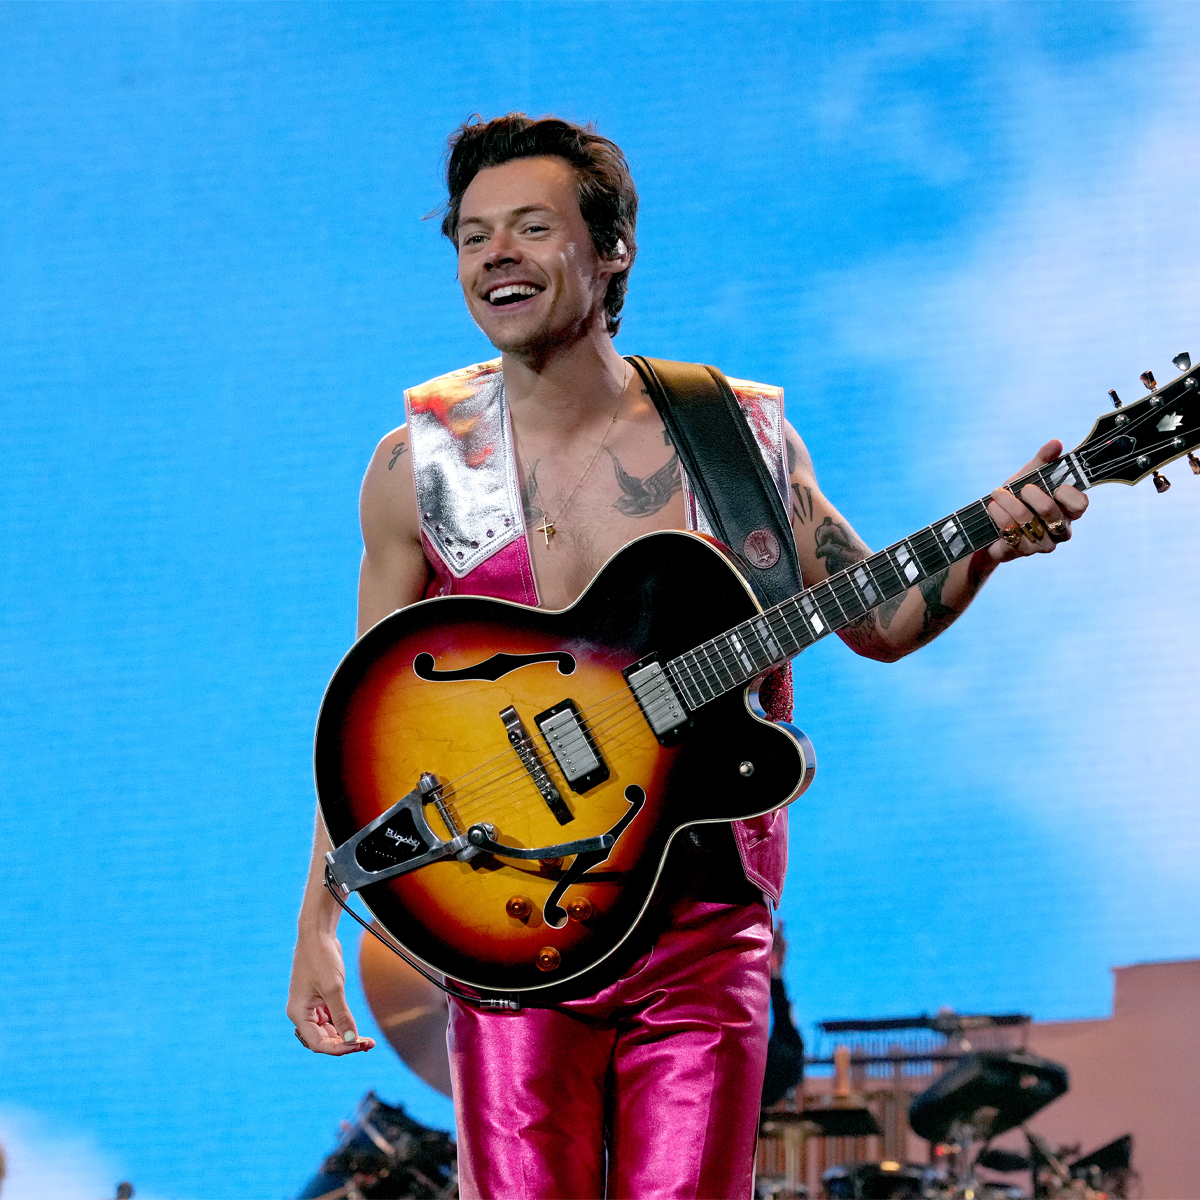 Harry Styles’ Golden Moments From His Love On Tour Are Award-Worthy